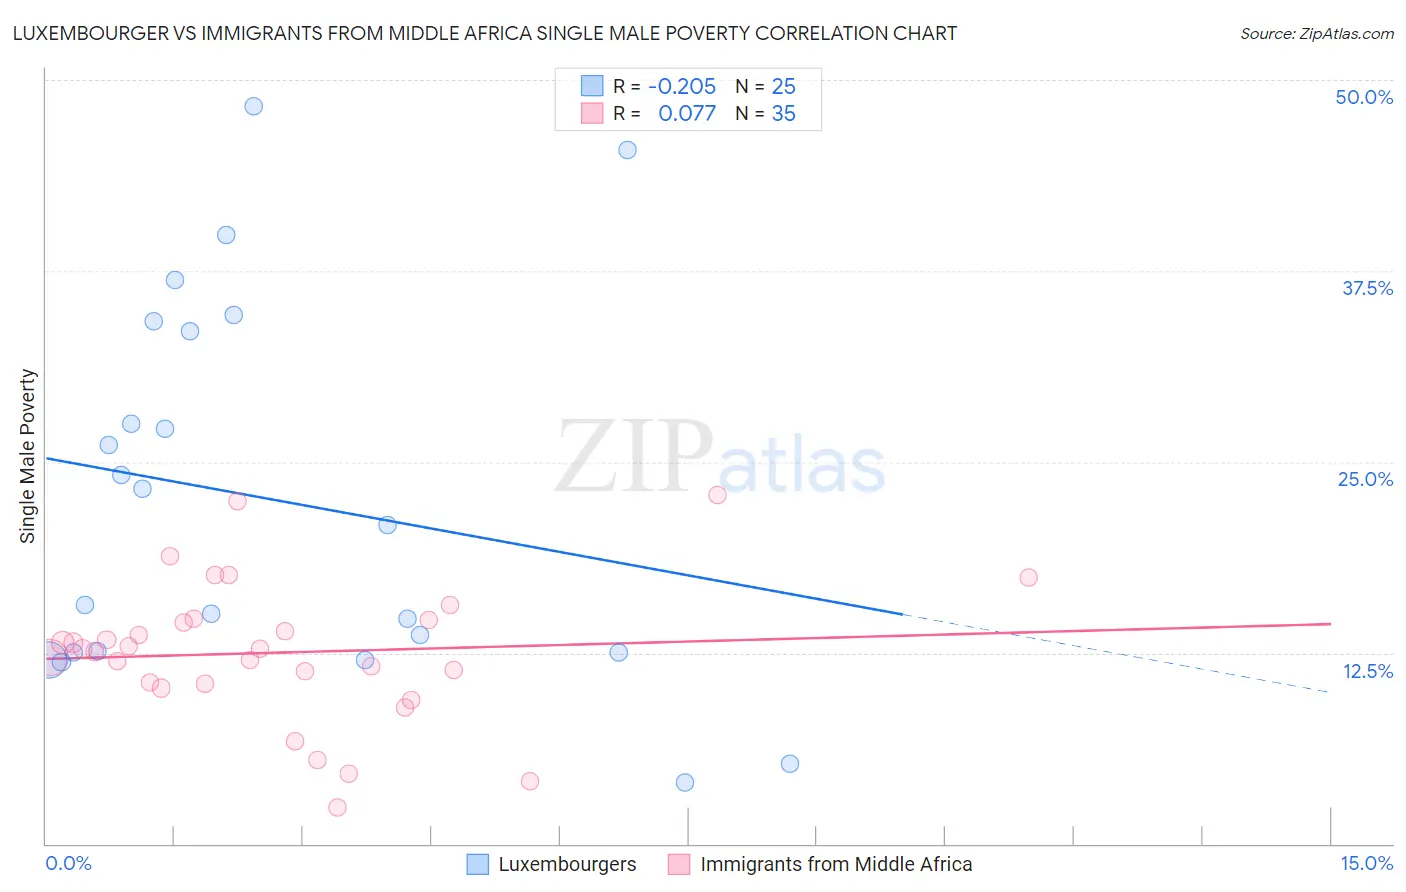 Luxembourger vs Immigrants from Middle Africa Single Male Poverty